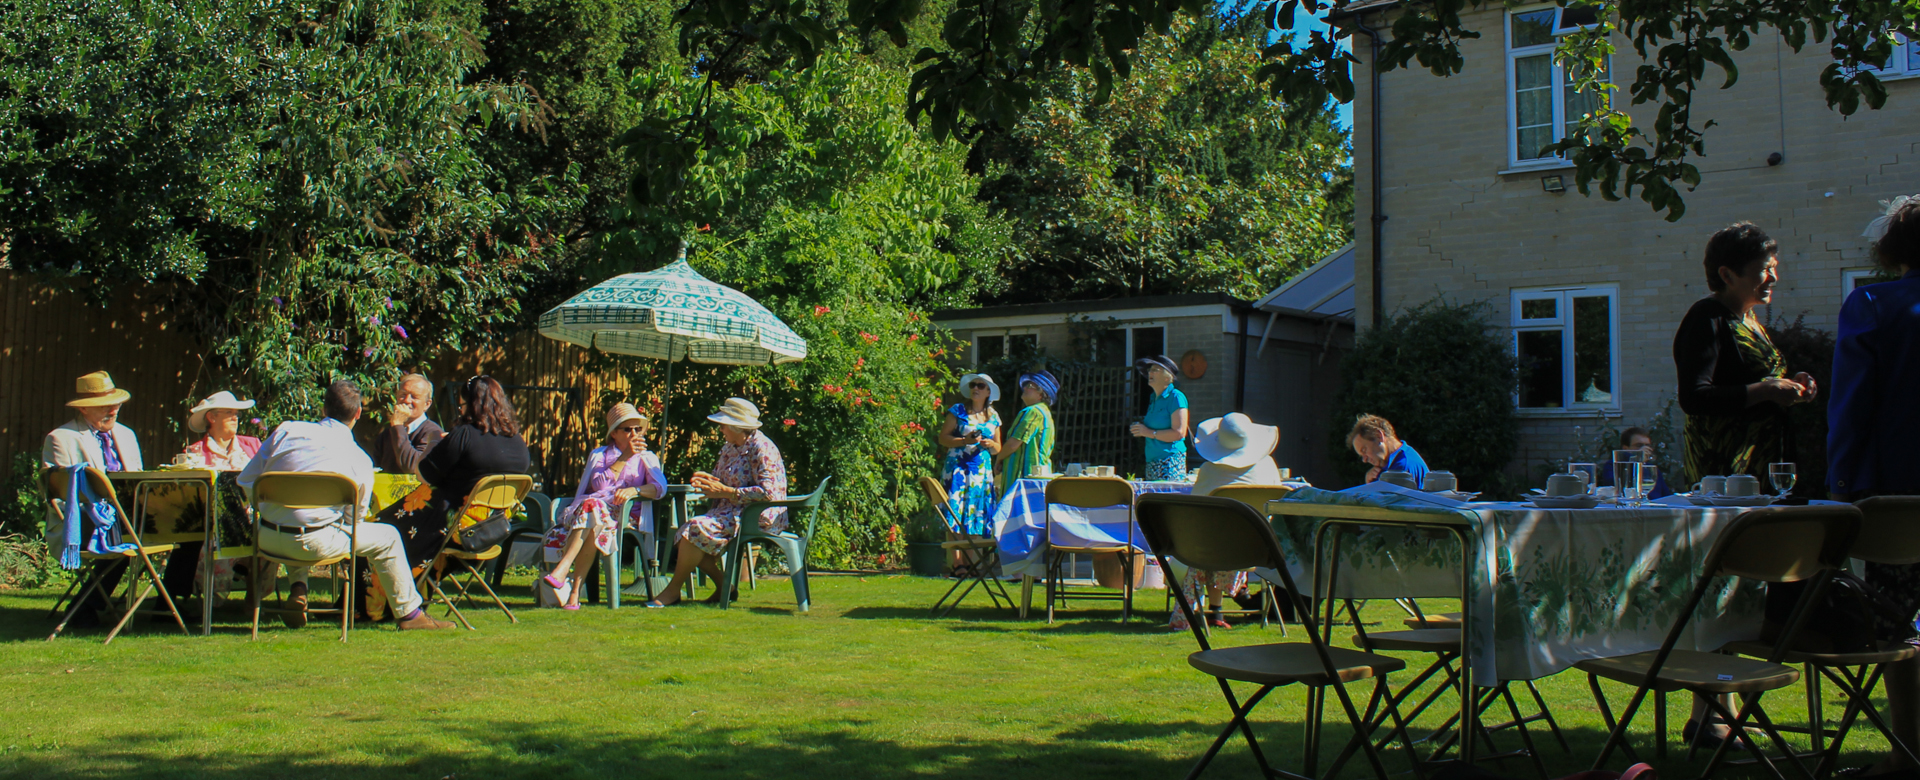 Revd Sally Lynch hosted a garden party on the vicarage lawn.